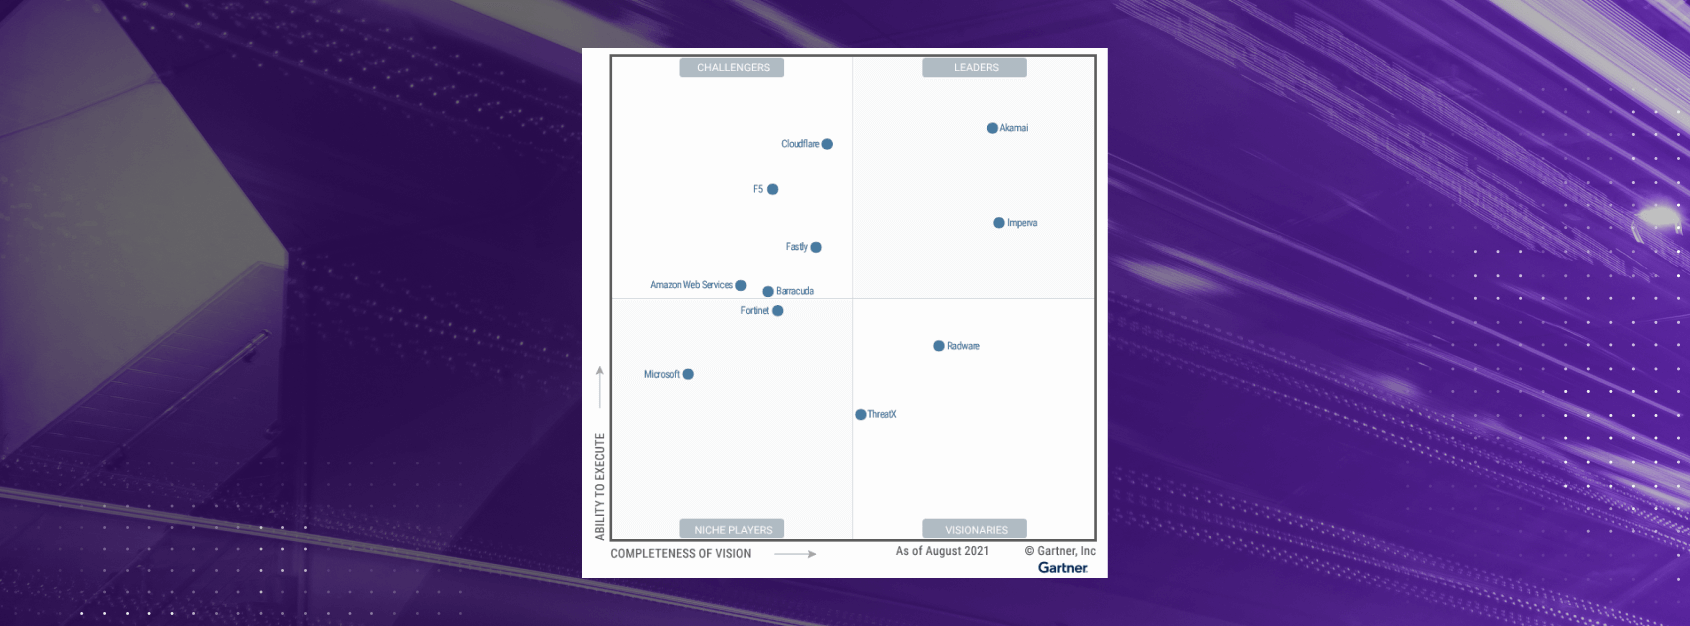 Imperva Is a Magic Quadrant Leader for Web Application and API Protection